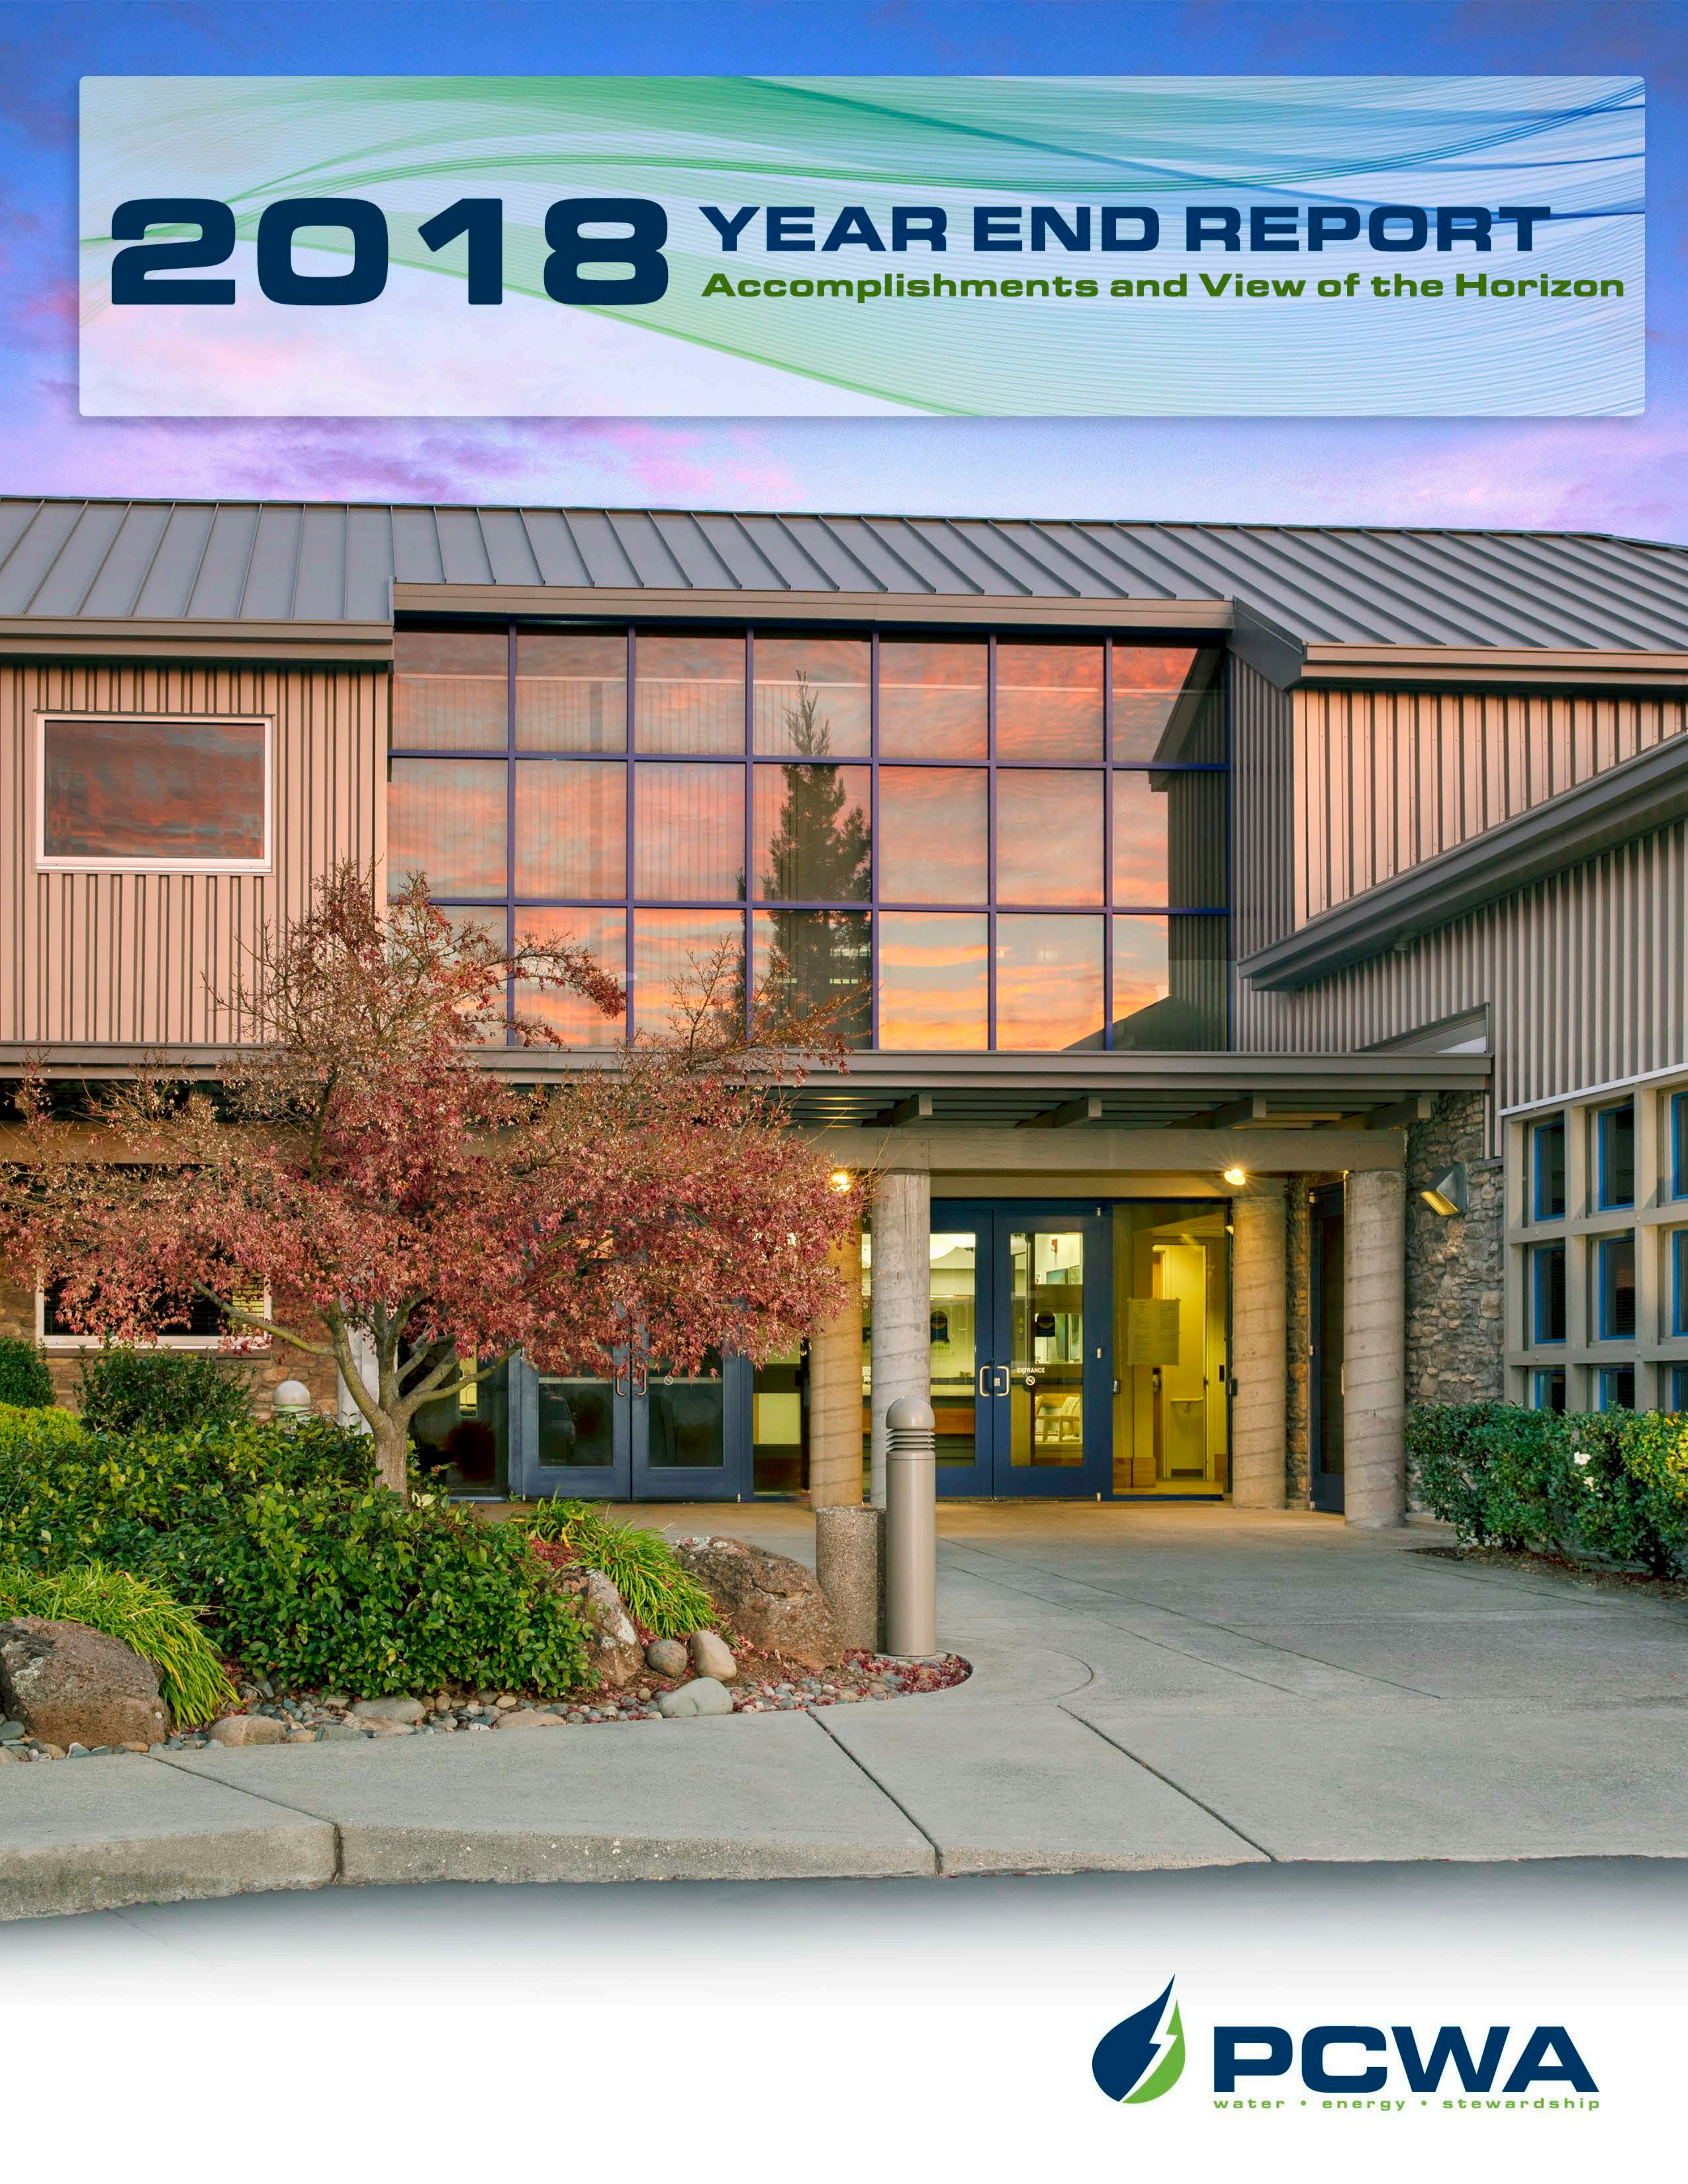 Thumbnail image and link for 2018 Year End Report publication